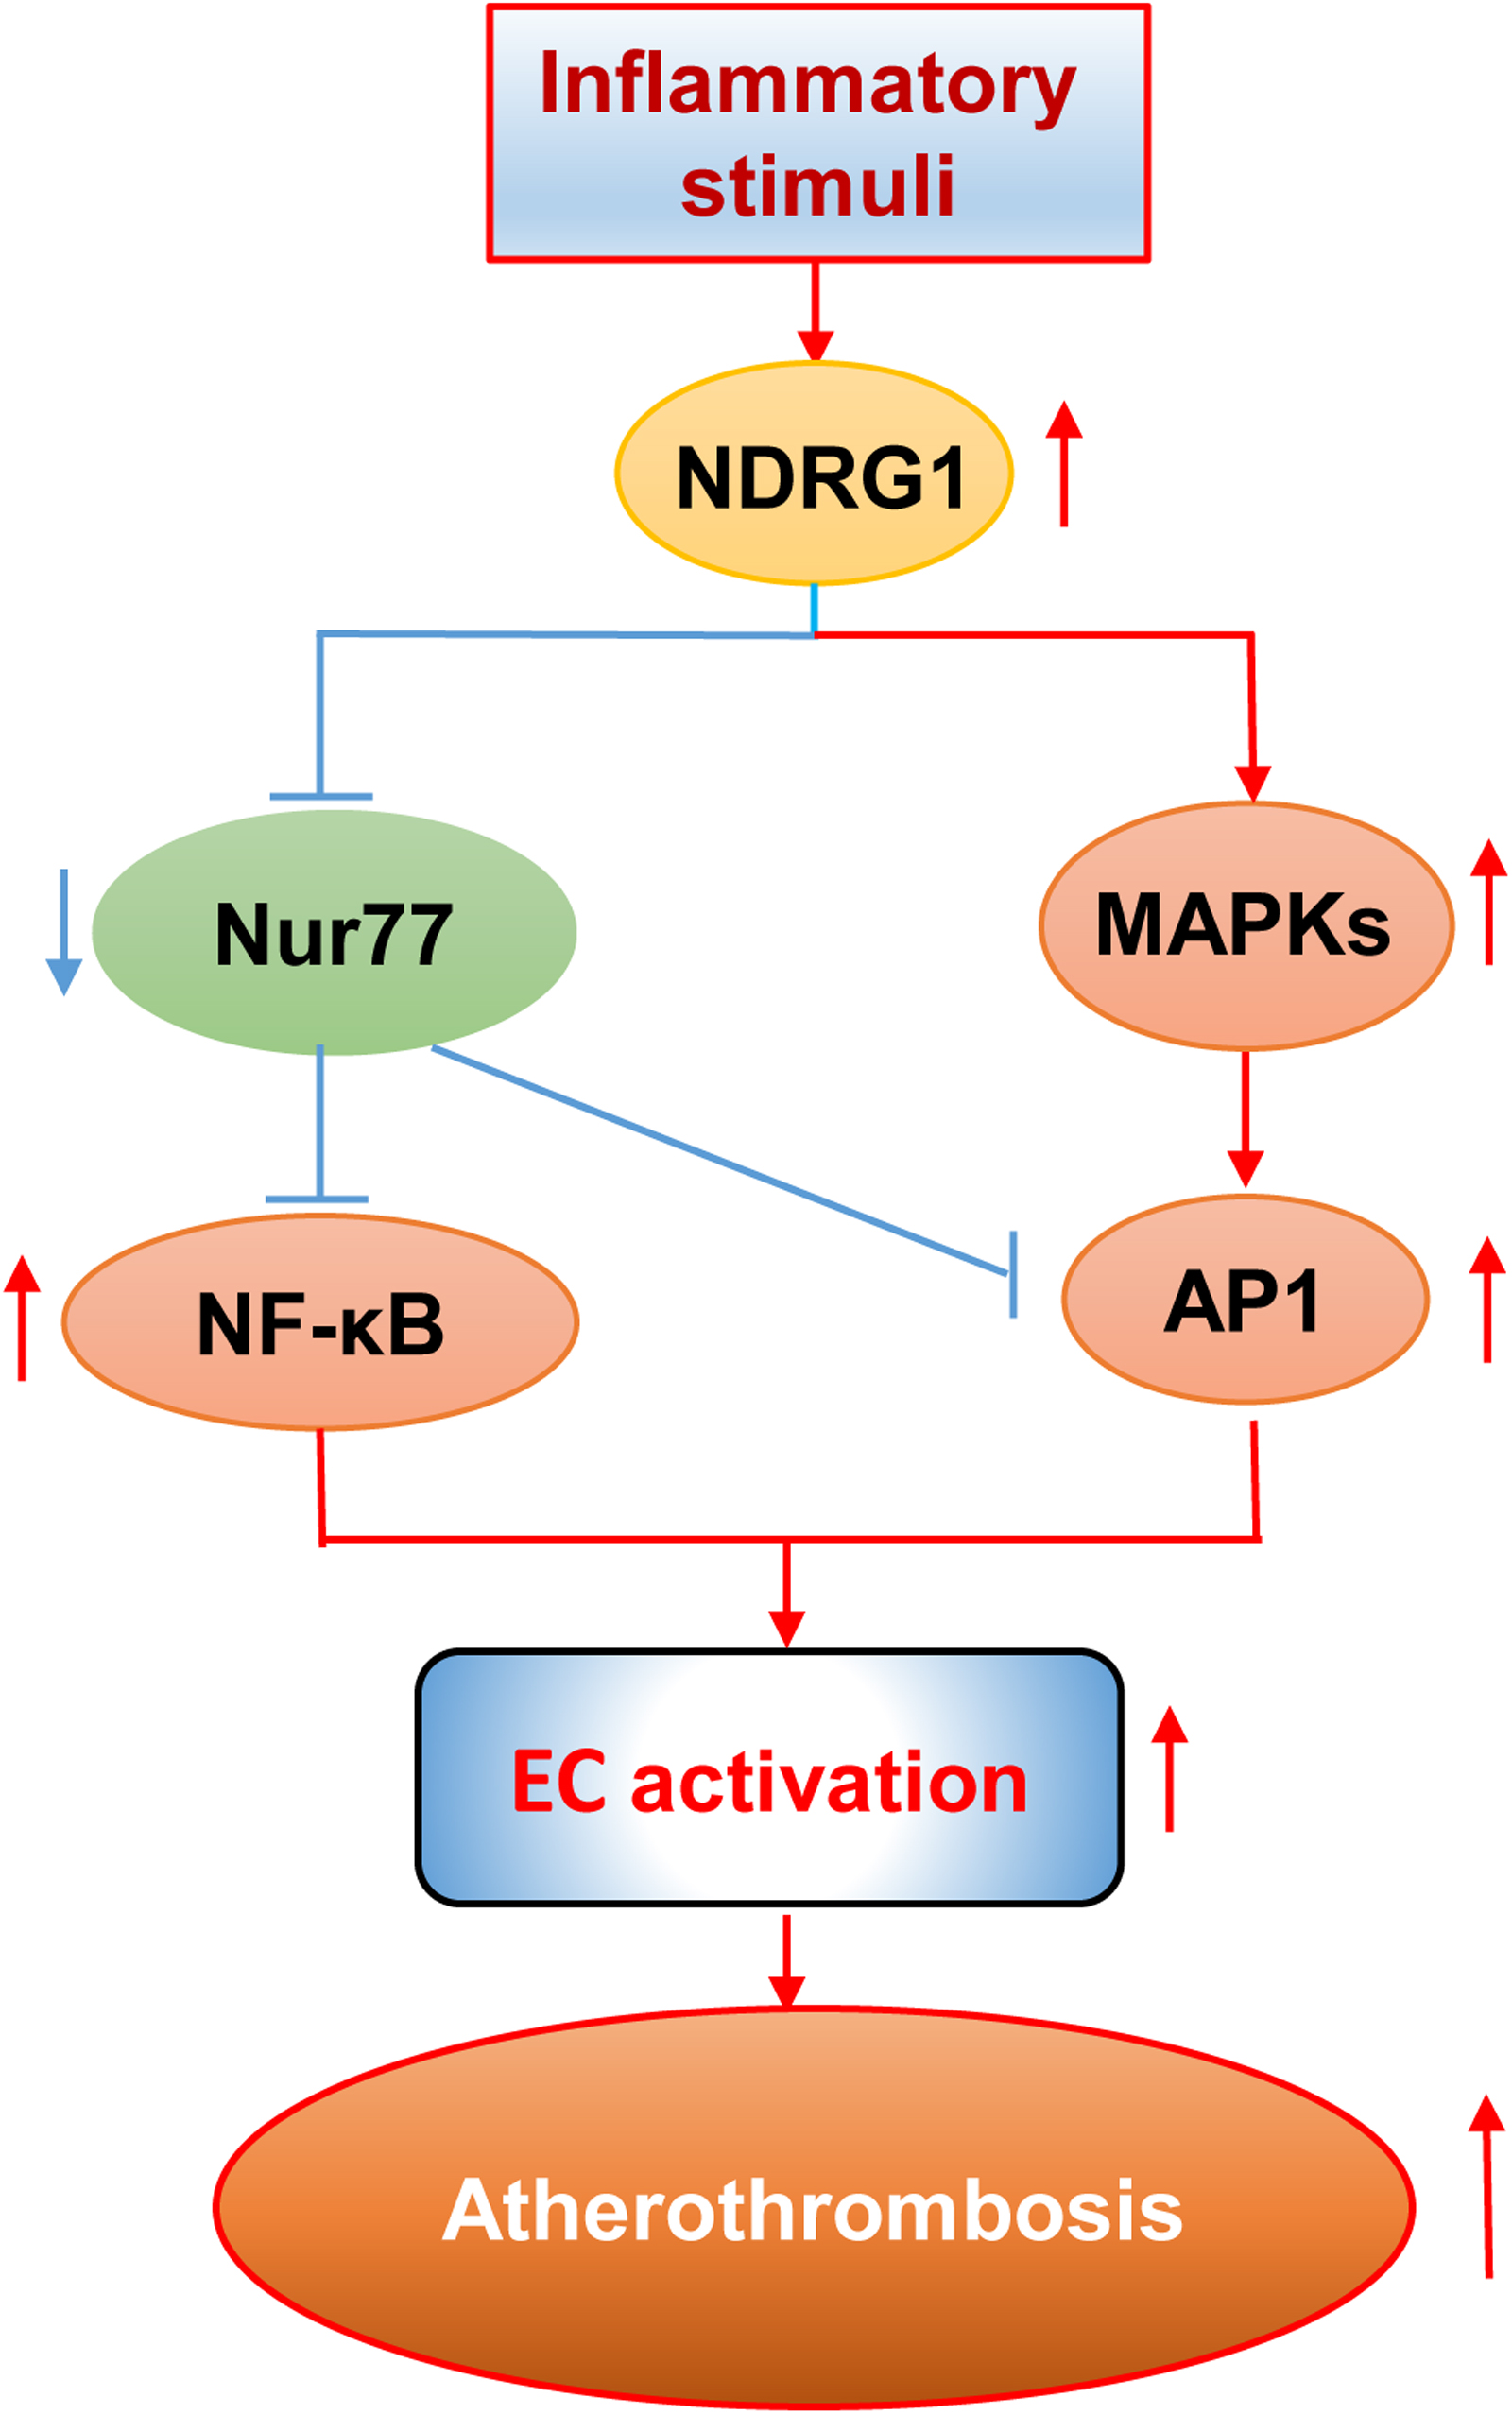 NDRG1 Signaling is Essential for Endothelial Inflammation and Vascular Remodeling